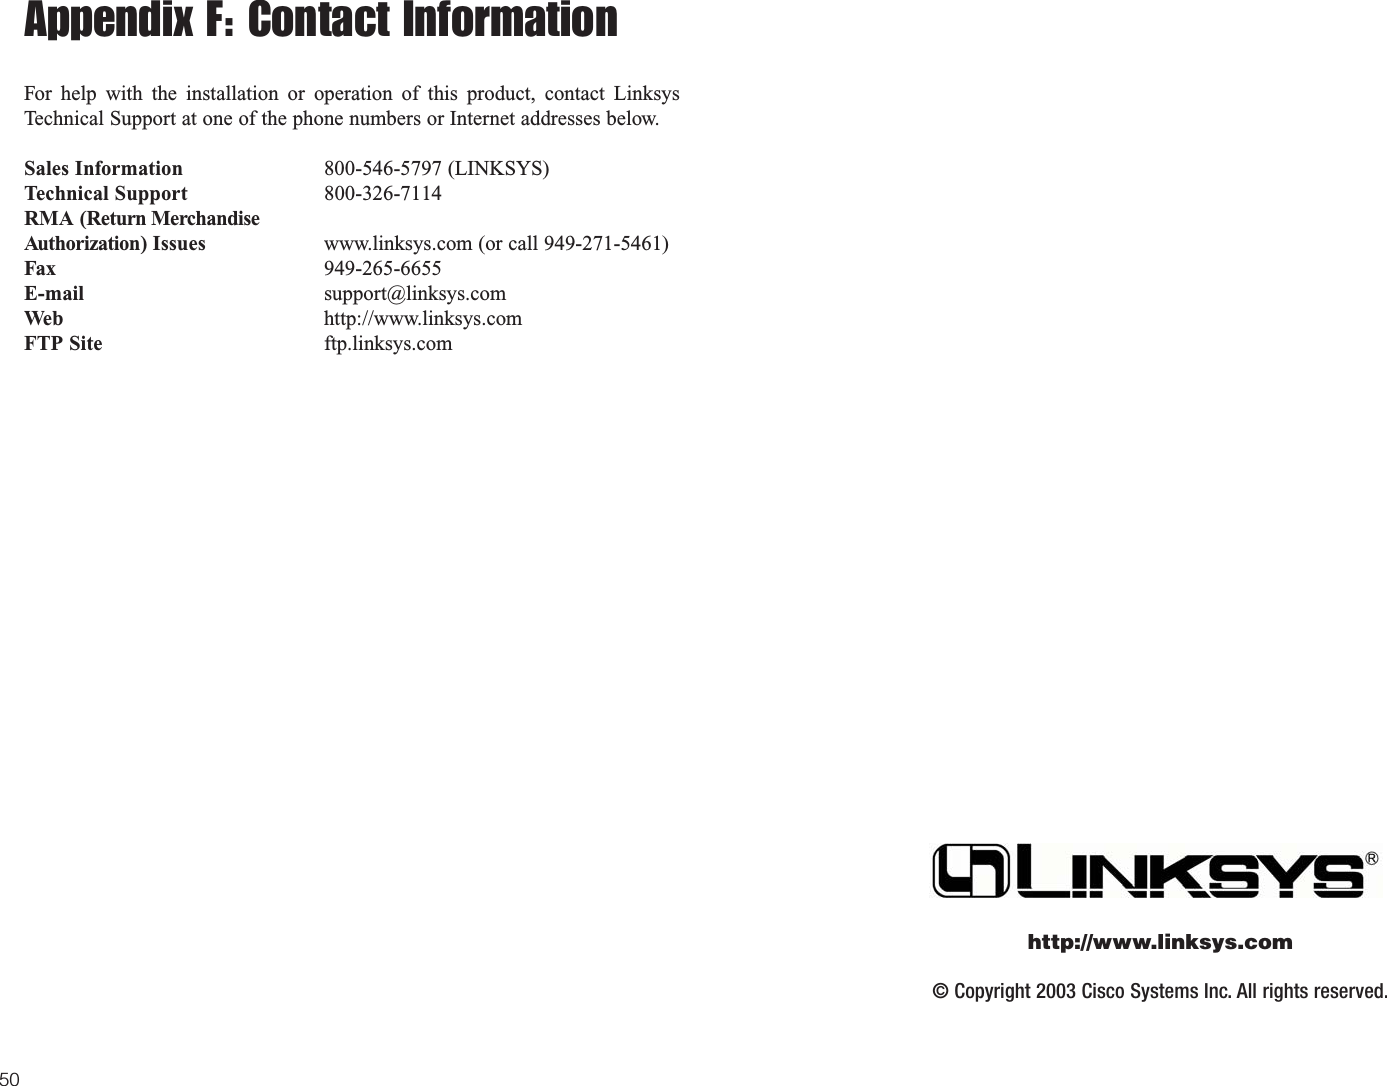 © Copyright 2003 Cisco Systems Inc. All rights reserved.http://www.linksys.com50Appendix F: Contact InformationFor help with the installation or operation of this product, contact LinksysTechnical Support at one of the phone numbers or Internet addresses below.Sales Information 800-546-5797 (LINKSYS)Technical Support 800-326-7114RMA (Return MerchandiseAuthorization) Issues www.linksys.com (or call 949-271-5461)Fax 949-265-6655E-mail support@linksys.comWeb http://www.linksys.comFTP Site ftp.linksys.com